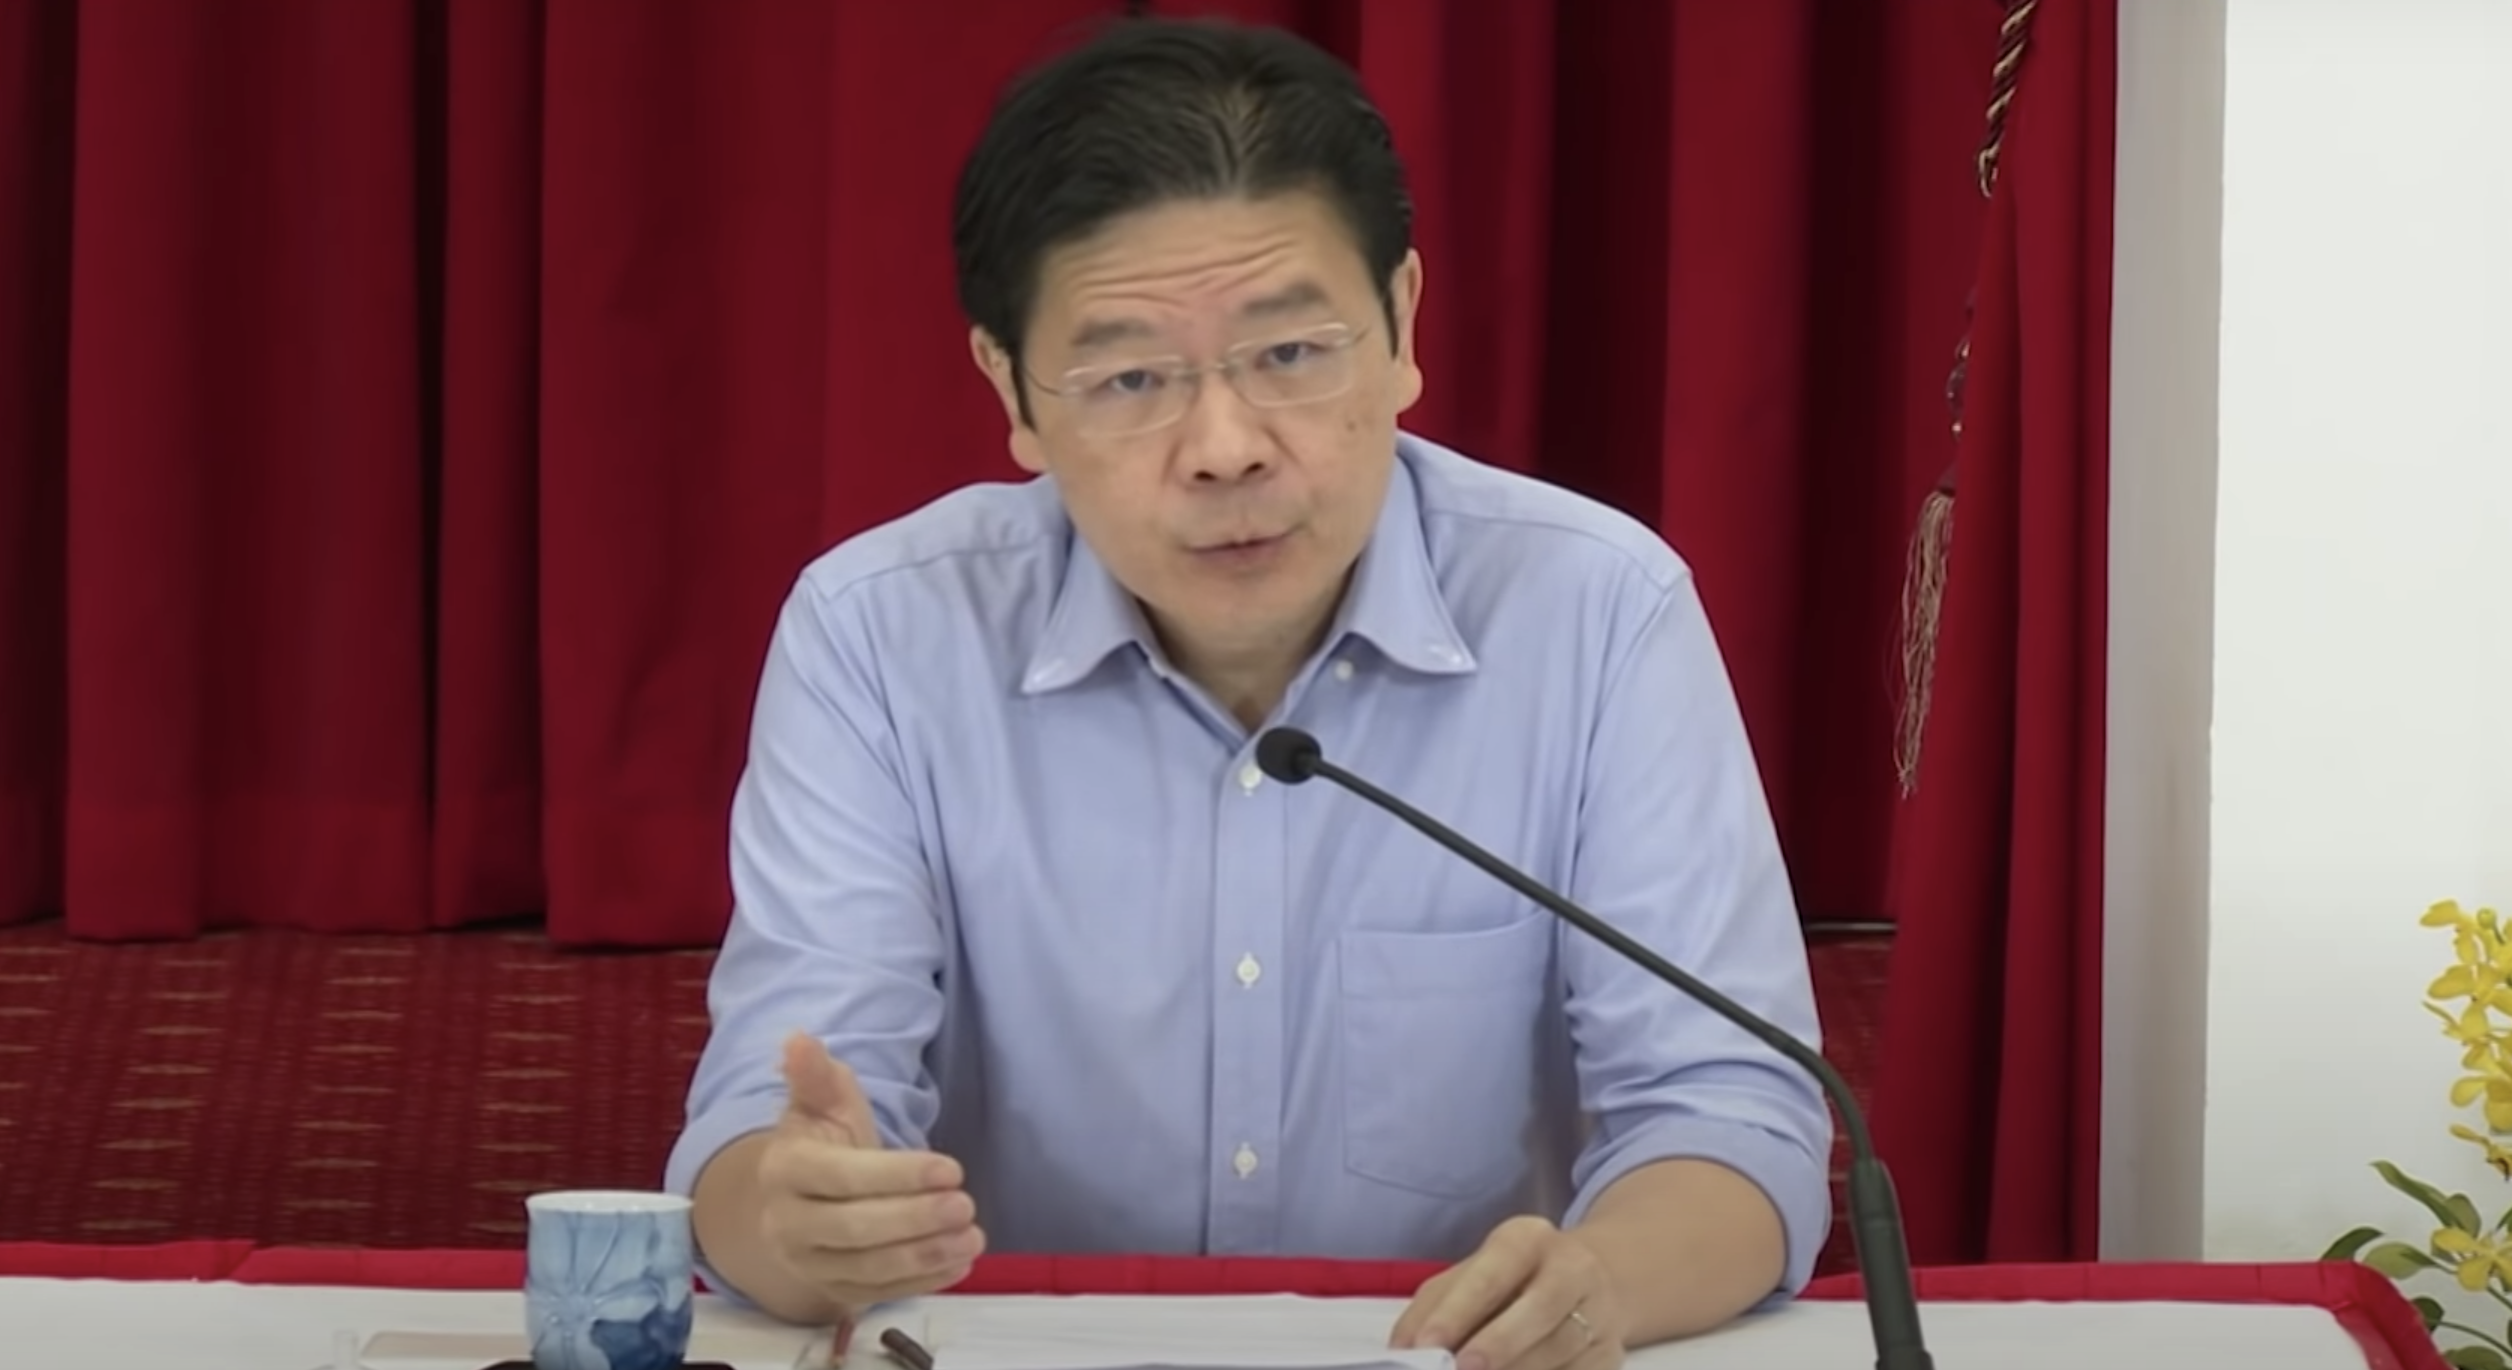 Is Lawrence Wong Ready to Navigate Singapore’s Complex Societal Issues?